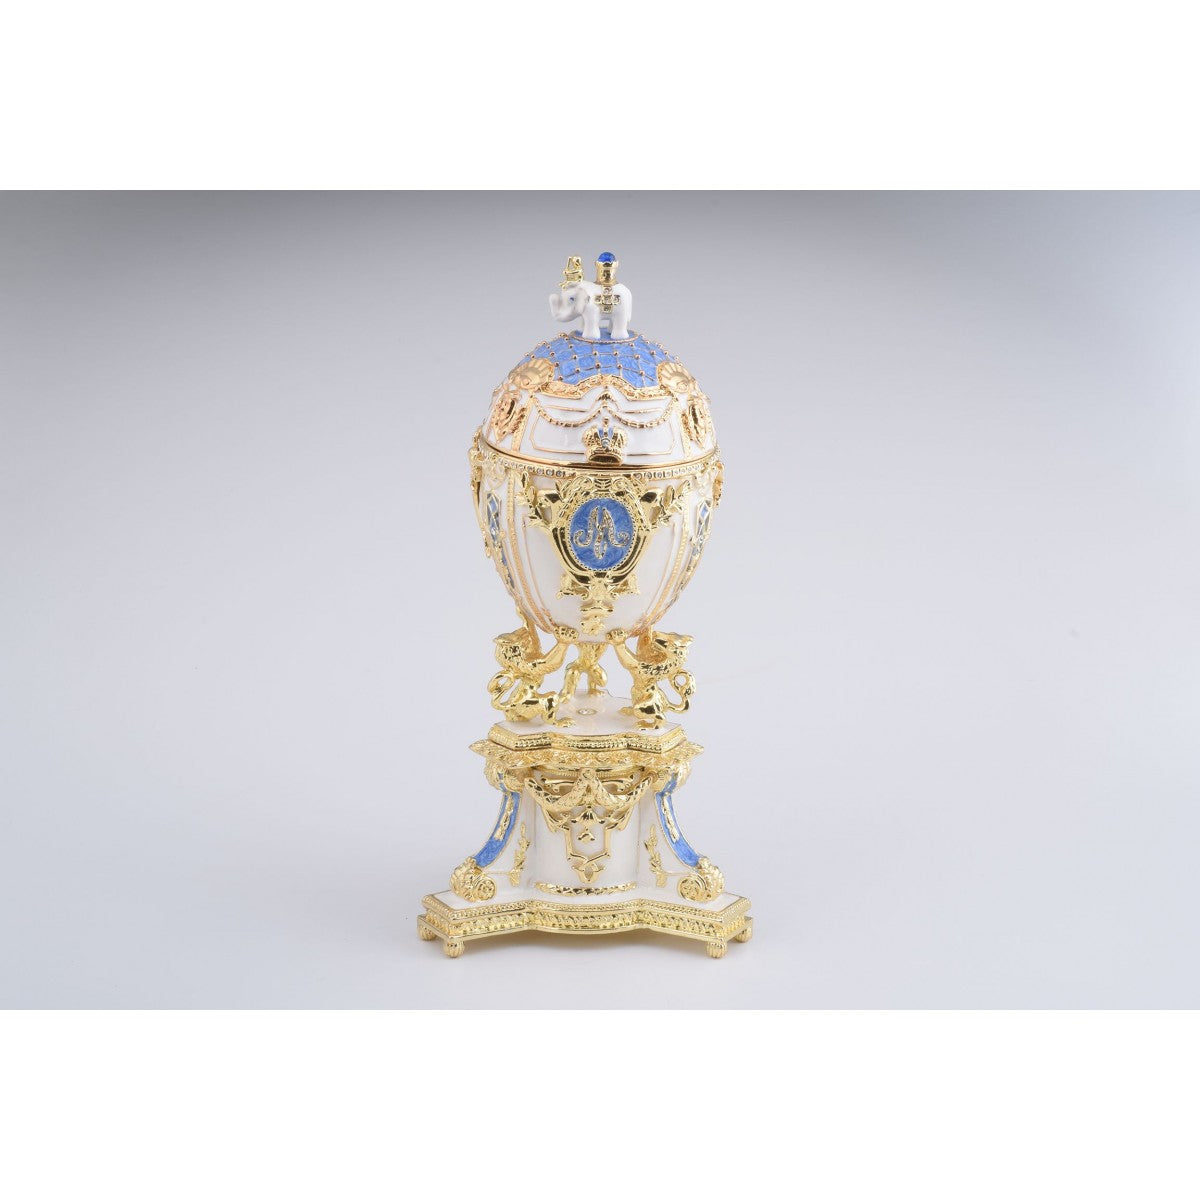 Royal Faberge Styled Egg with an Elephant on Top Trinket Box by Keren Kopal